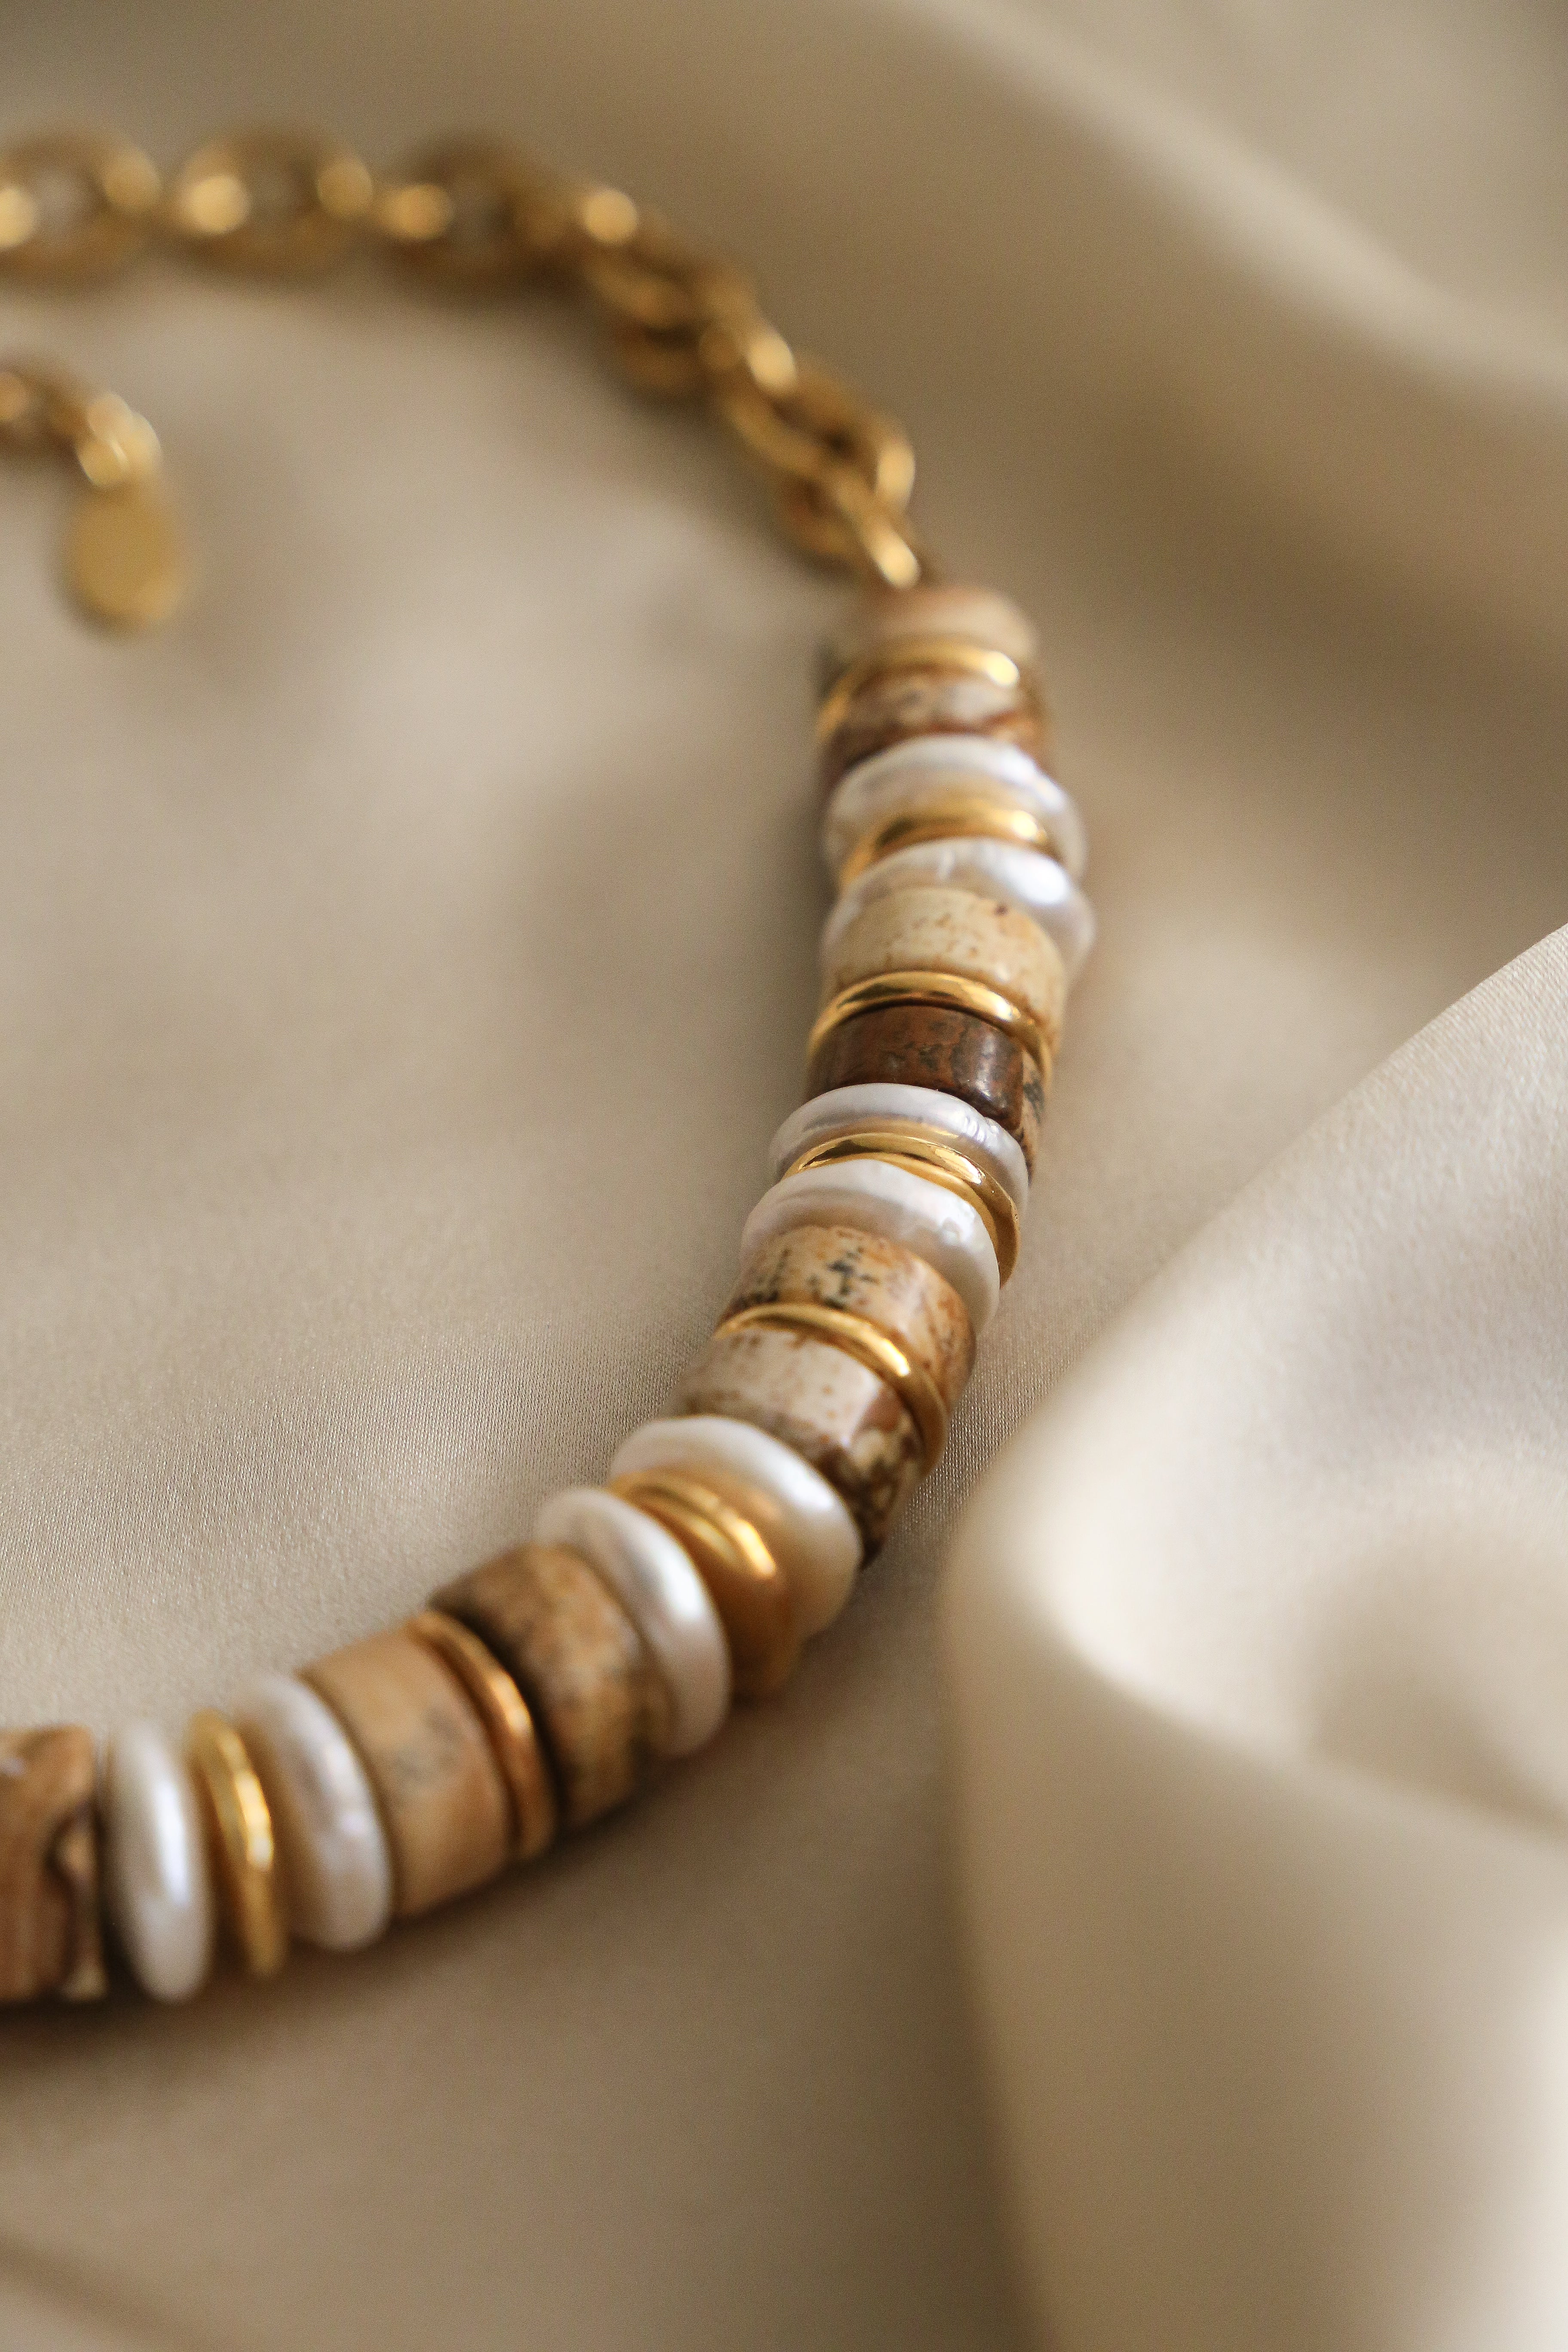 Naomi Necklace - Boutique Minimaliste has waterproof, durable, elegant and vintage inspired jewelry